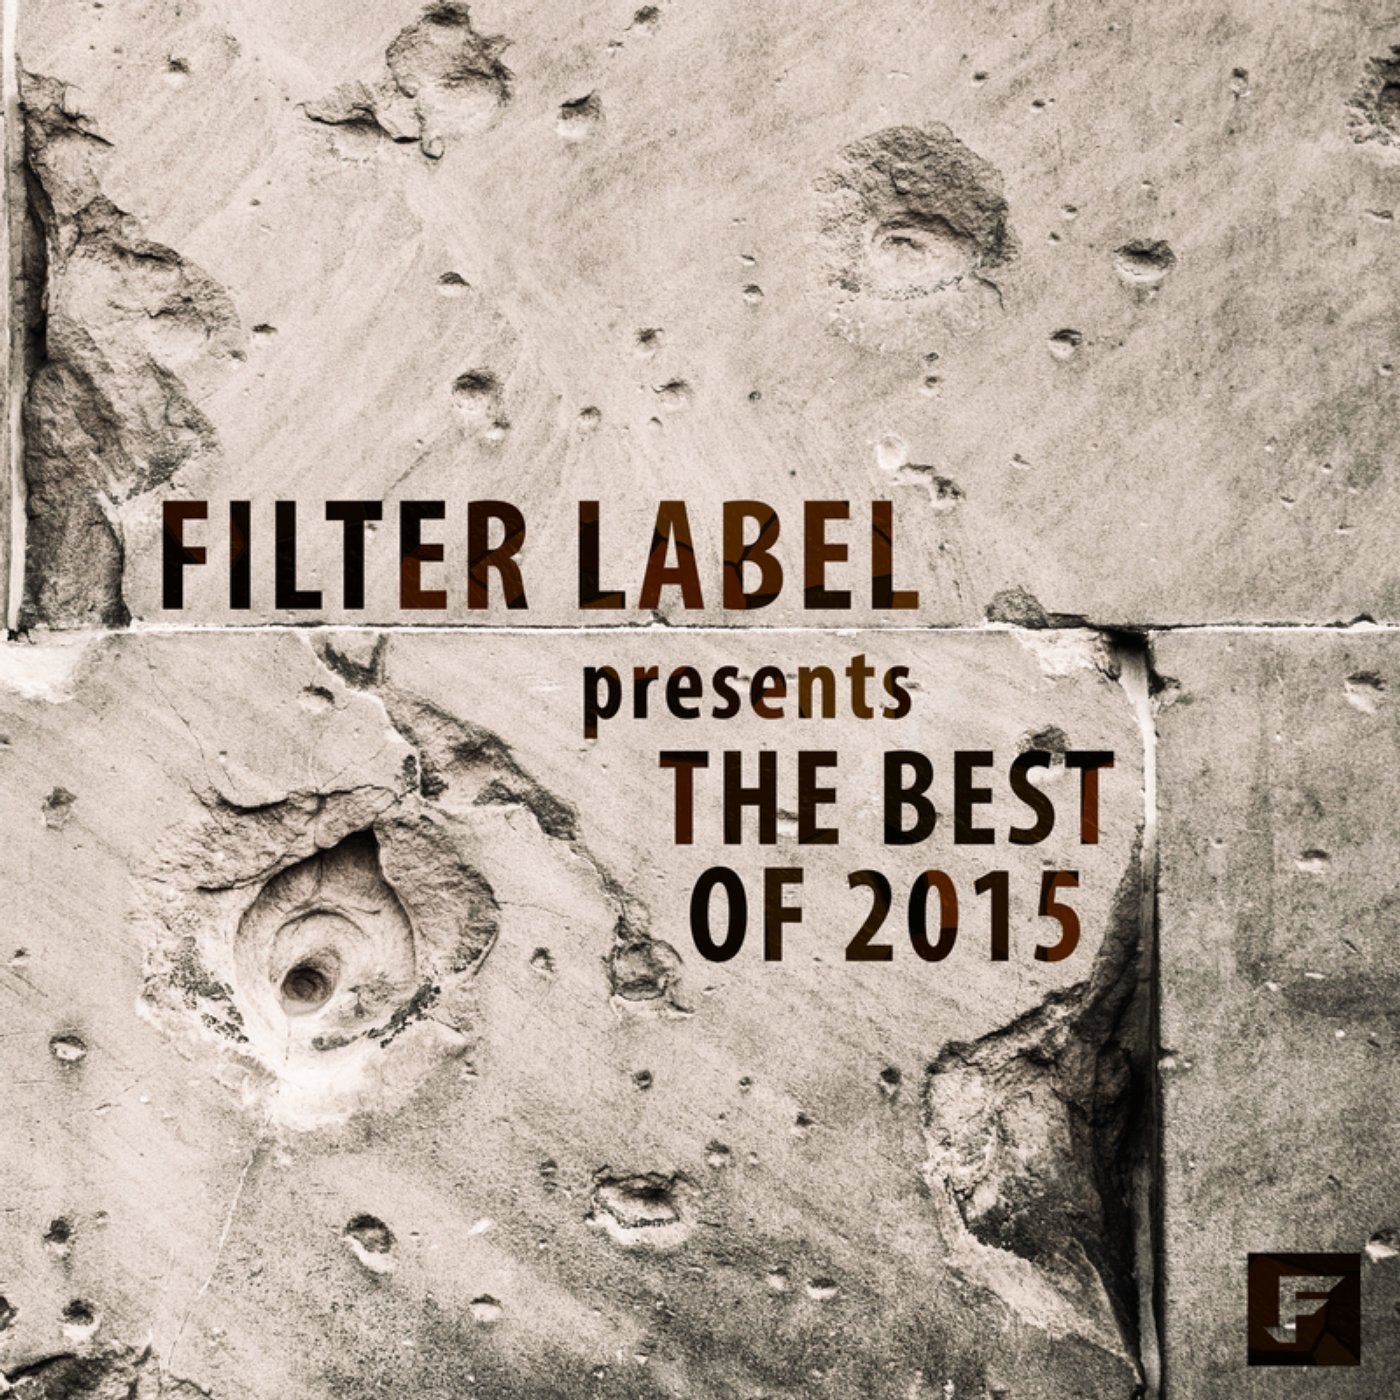 Filter Label Presents the Best of 2015